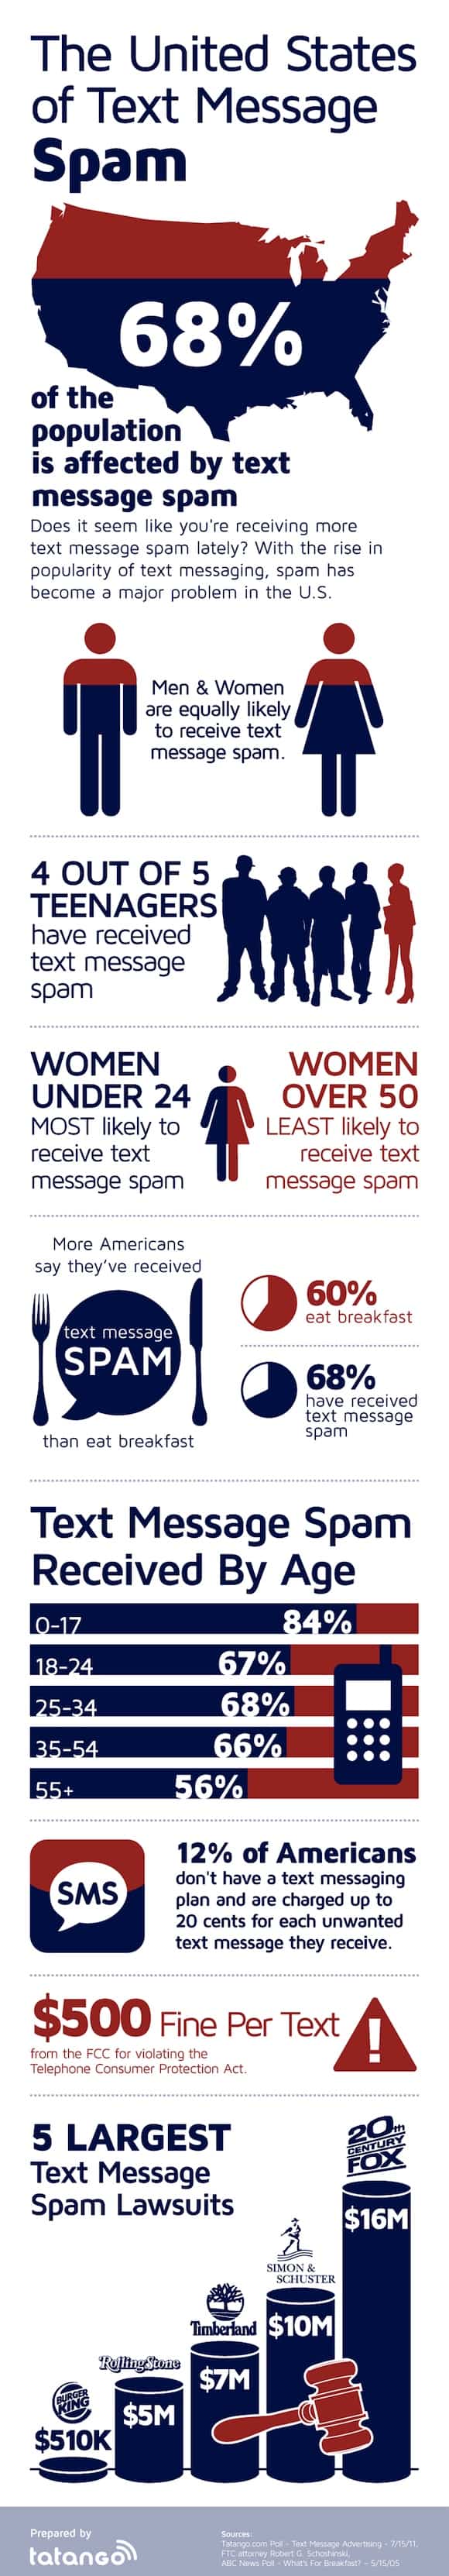 The United States of Text Message Spam Infographic